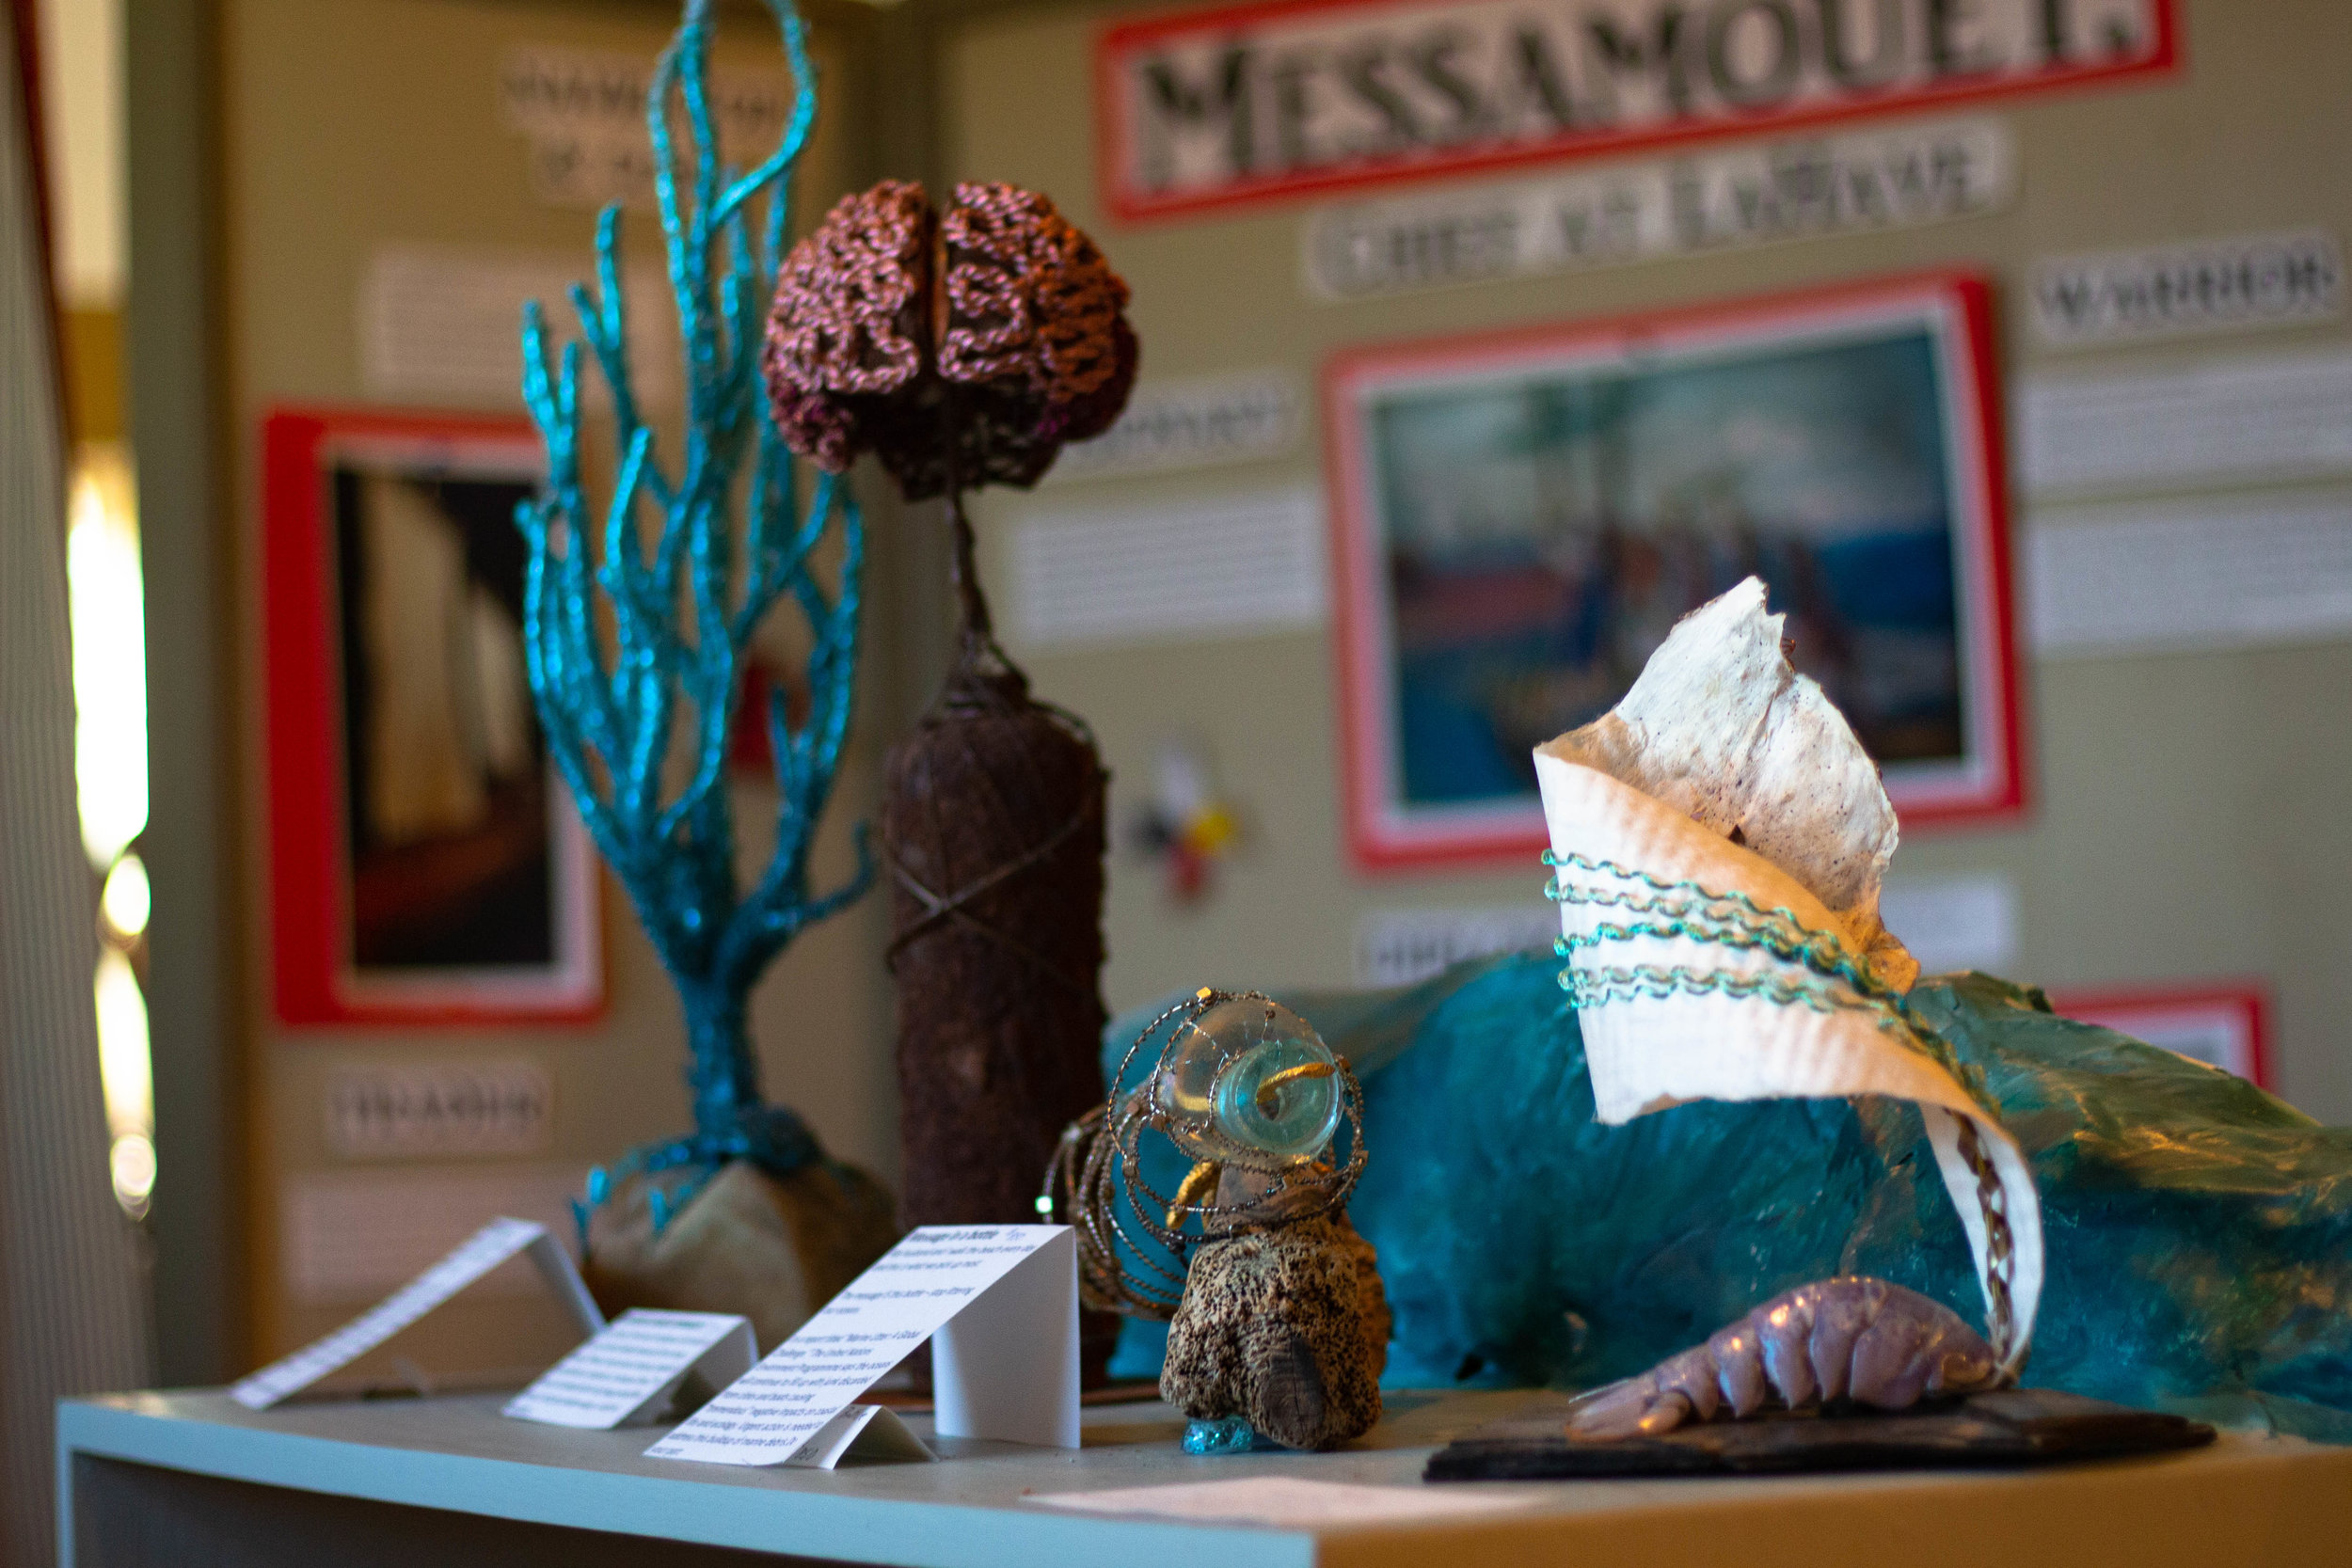   The museum strives to celebrate a wide range of of LaHave heritage. Special summer exhibits often showcase local artisans and their unique maritime influenced art.  